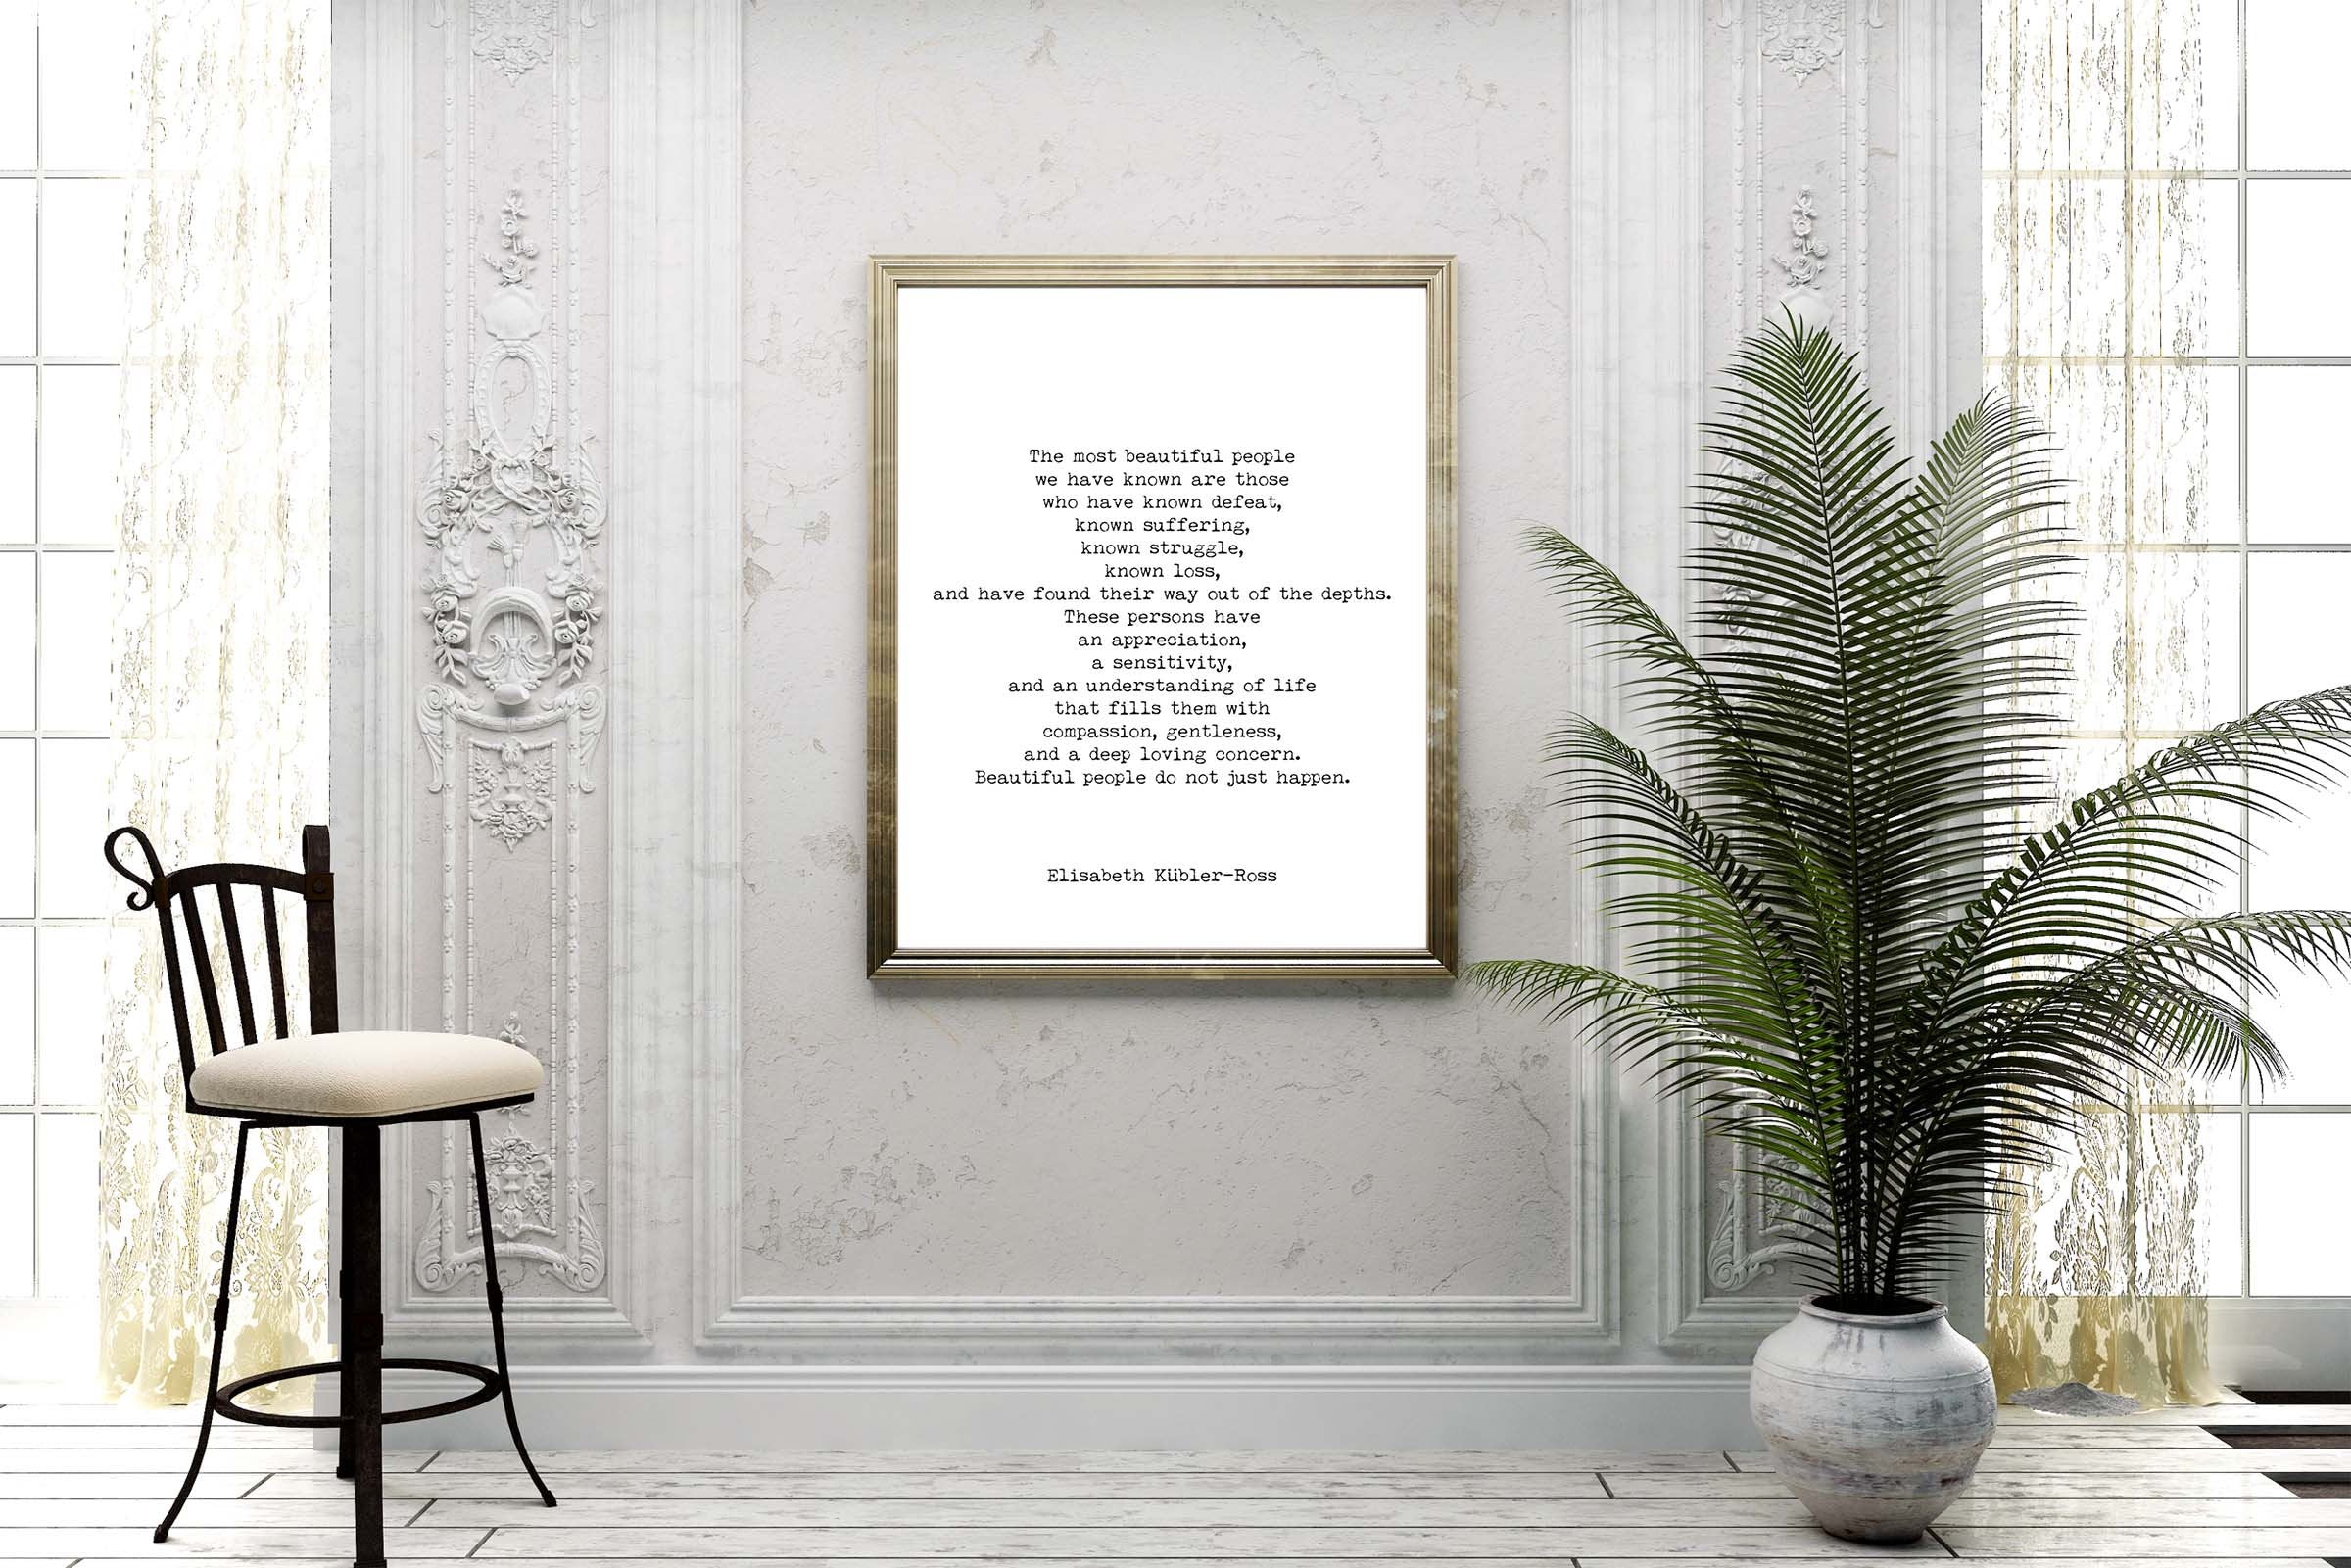 The Most Beautiful People Quote Print, Elisabeth Kubler-Ross Wall Art Print, Black & White Inspirational Life Quote Poster Unframed - BookQuoteDecor